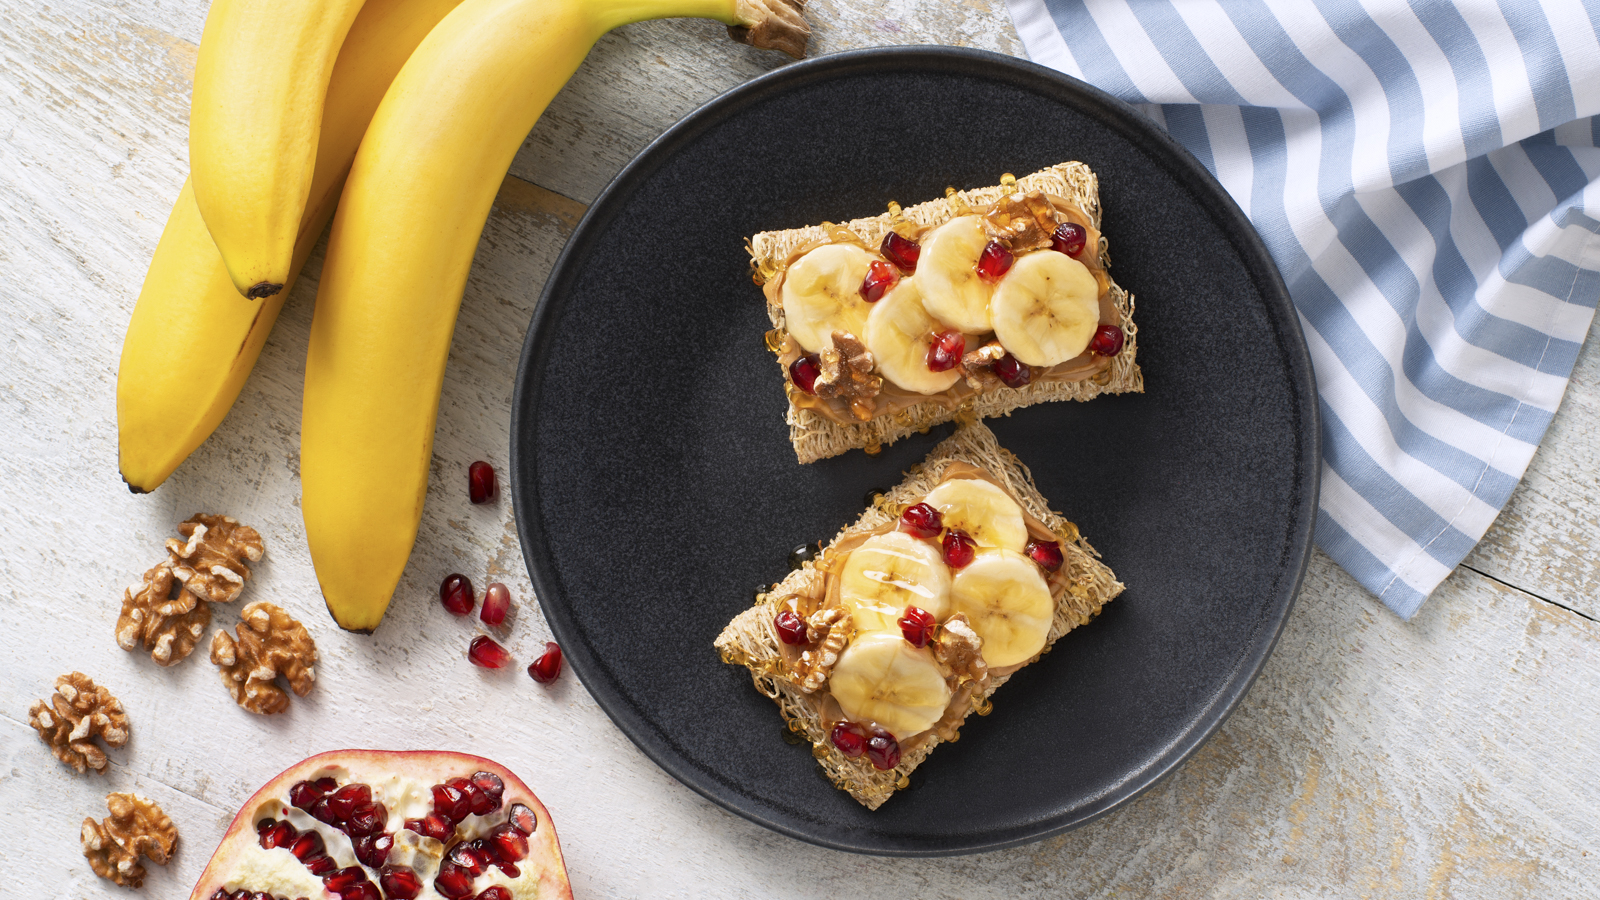 Two shredded wheat biscuits on a black plate with banana slices and pomegranate pieces.